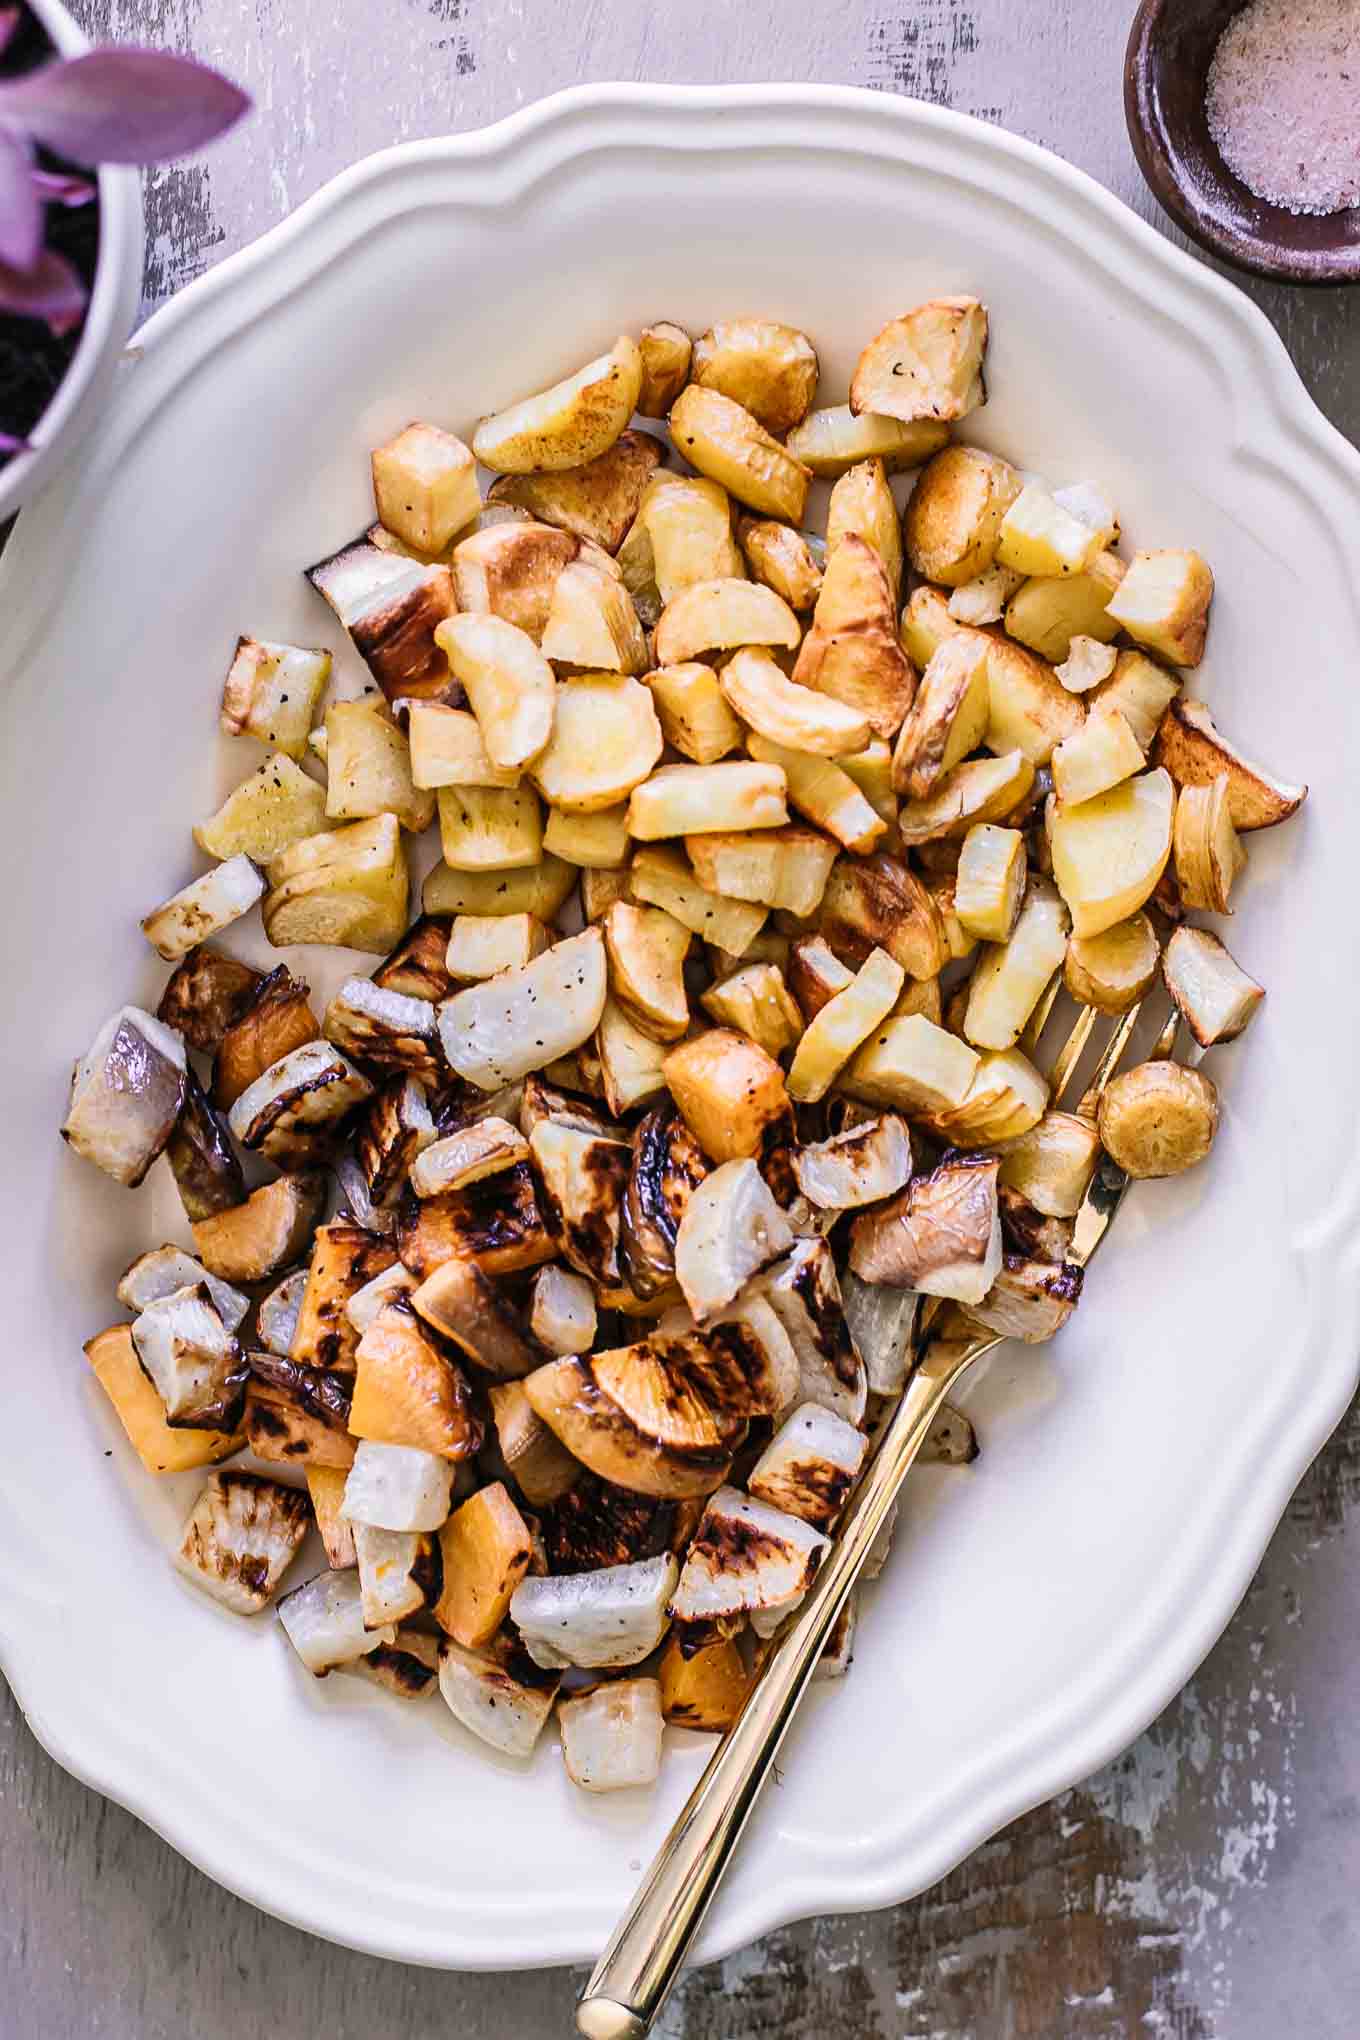 roasted parsnips and turnips on a white plate with a gold fork